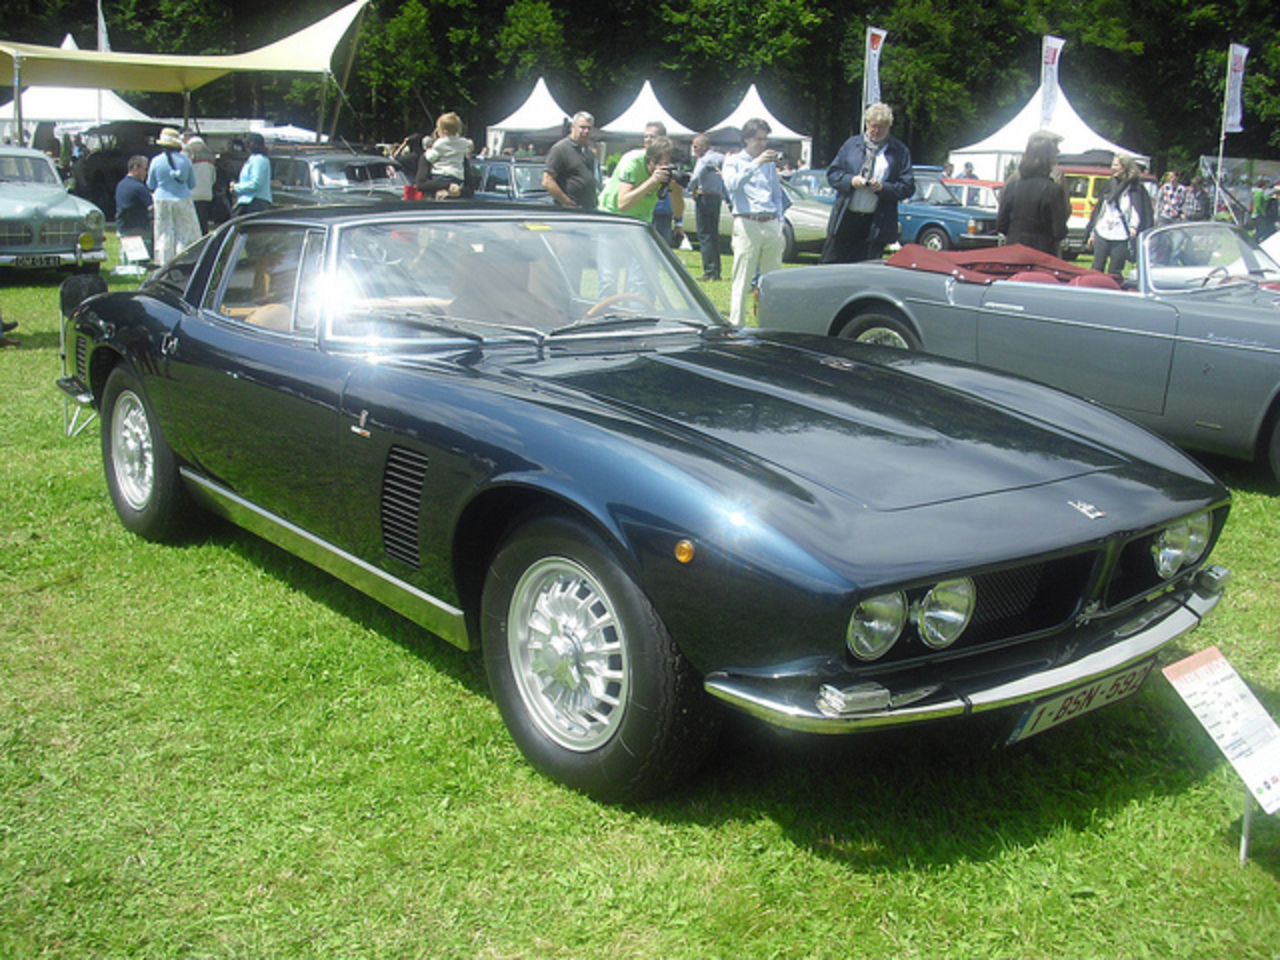 Iso Grifo GL 350 [1966] | Flickr - Photo Sharing!